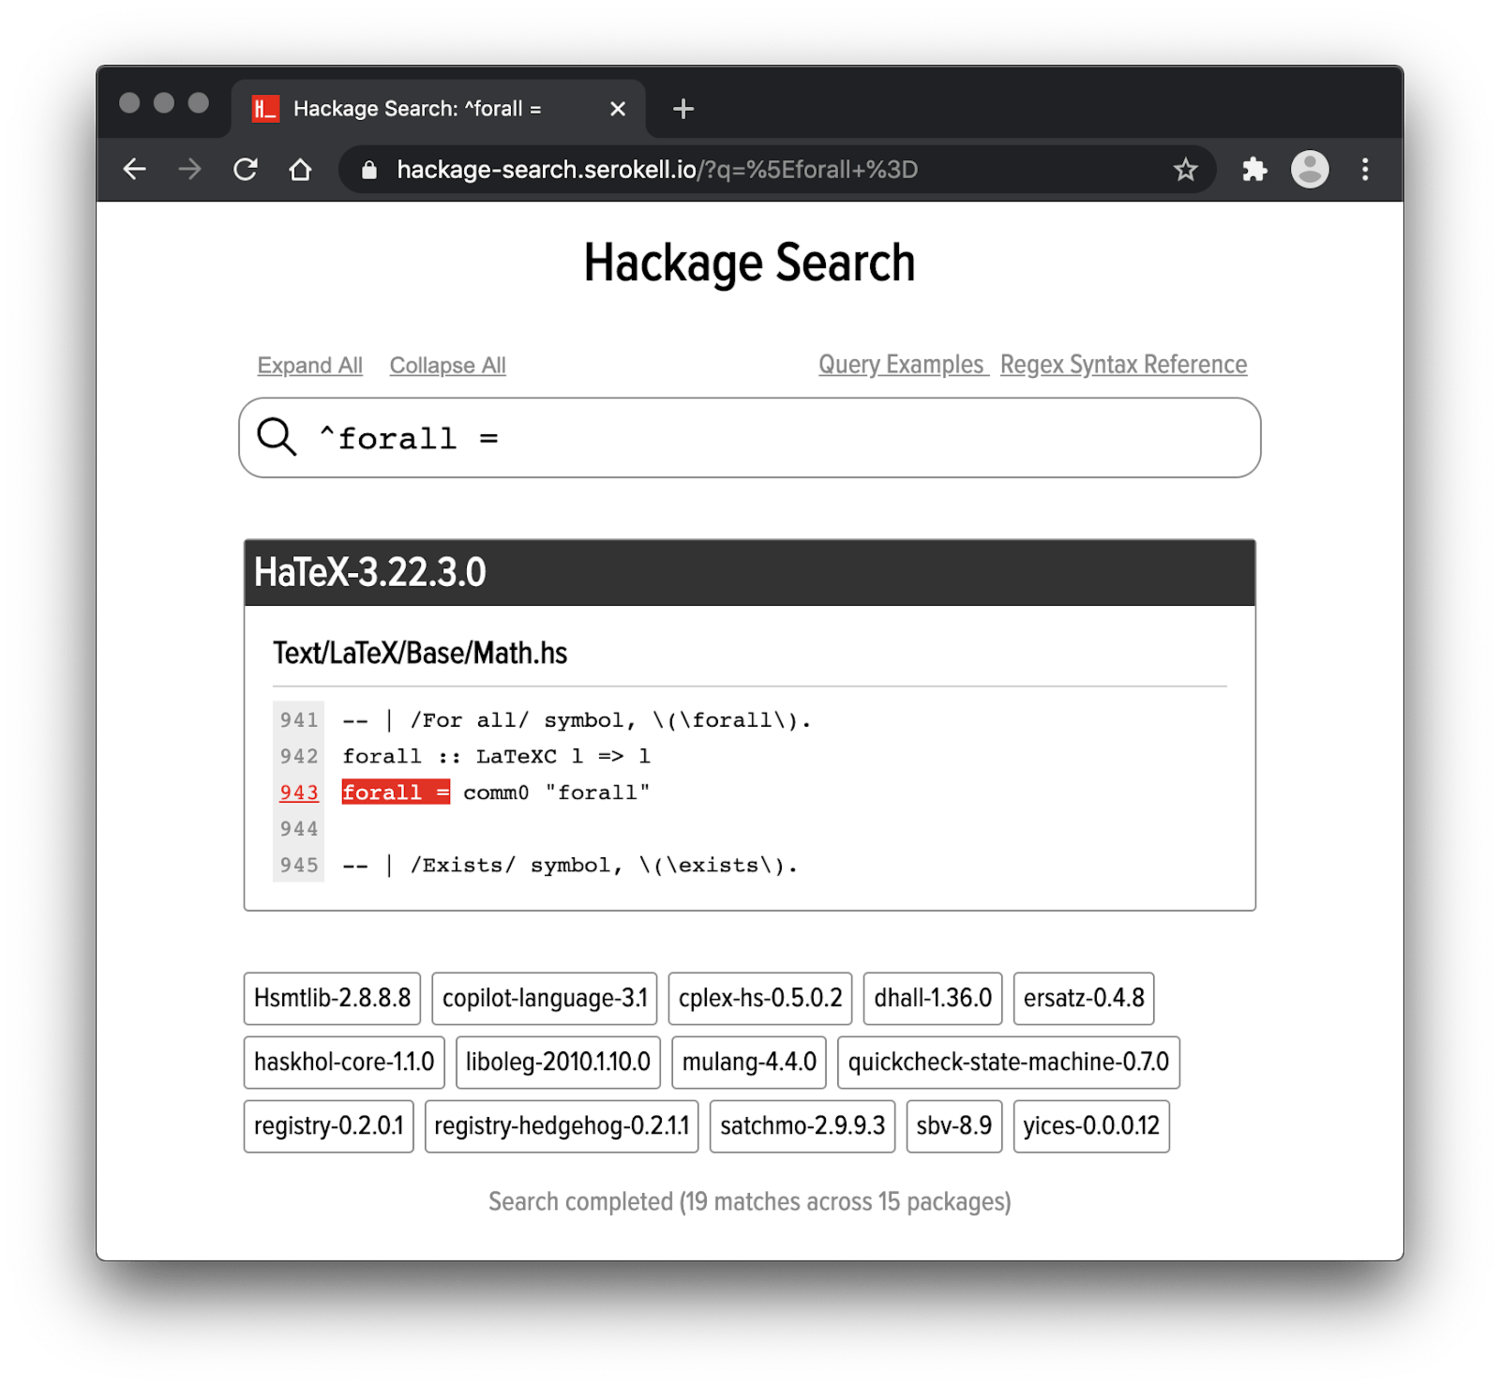 Hackage Search screenshot with a query